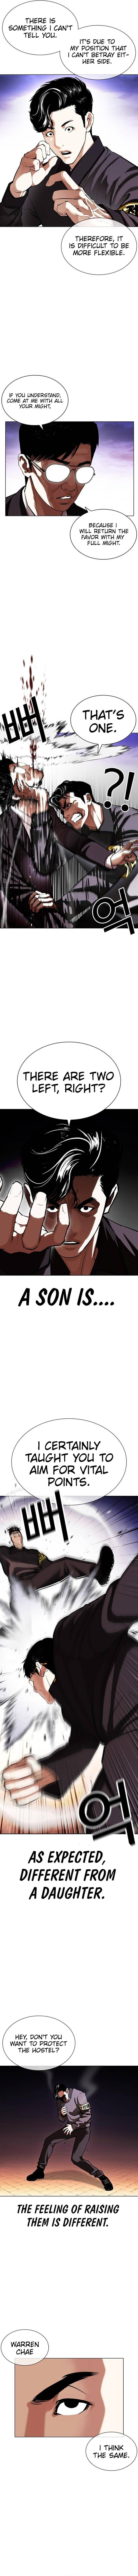 Lookism Chapter 400 page 5 - MangaWeebs.in